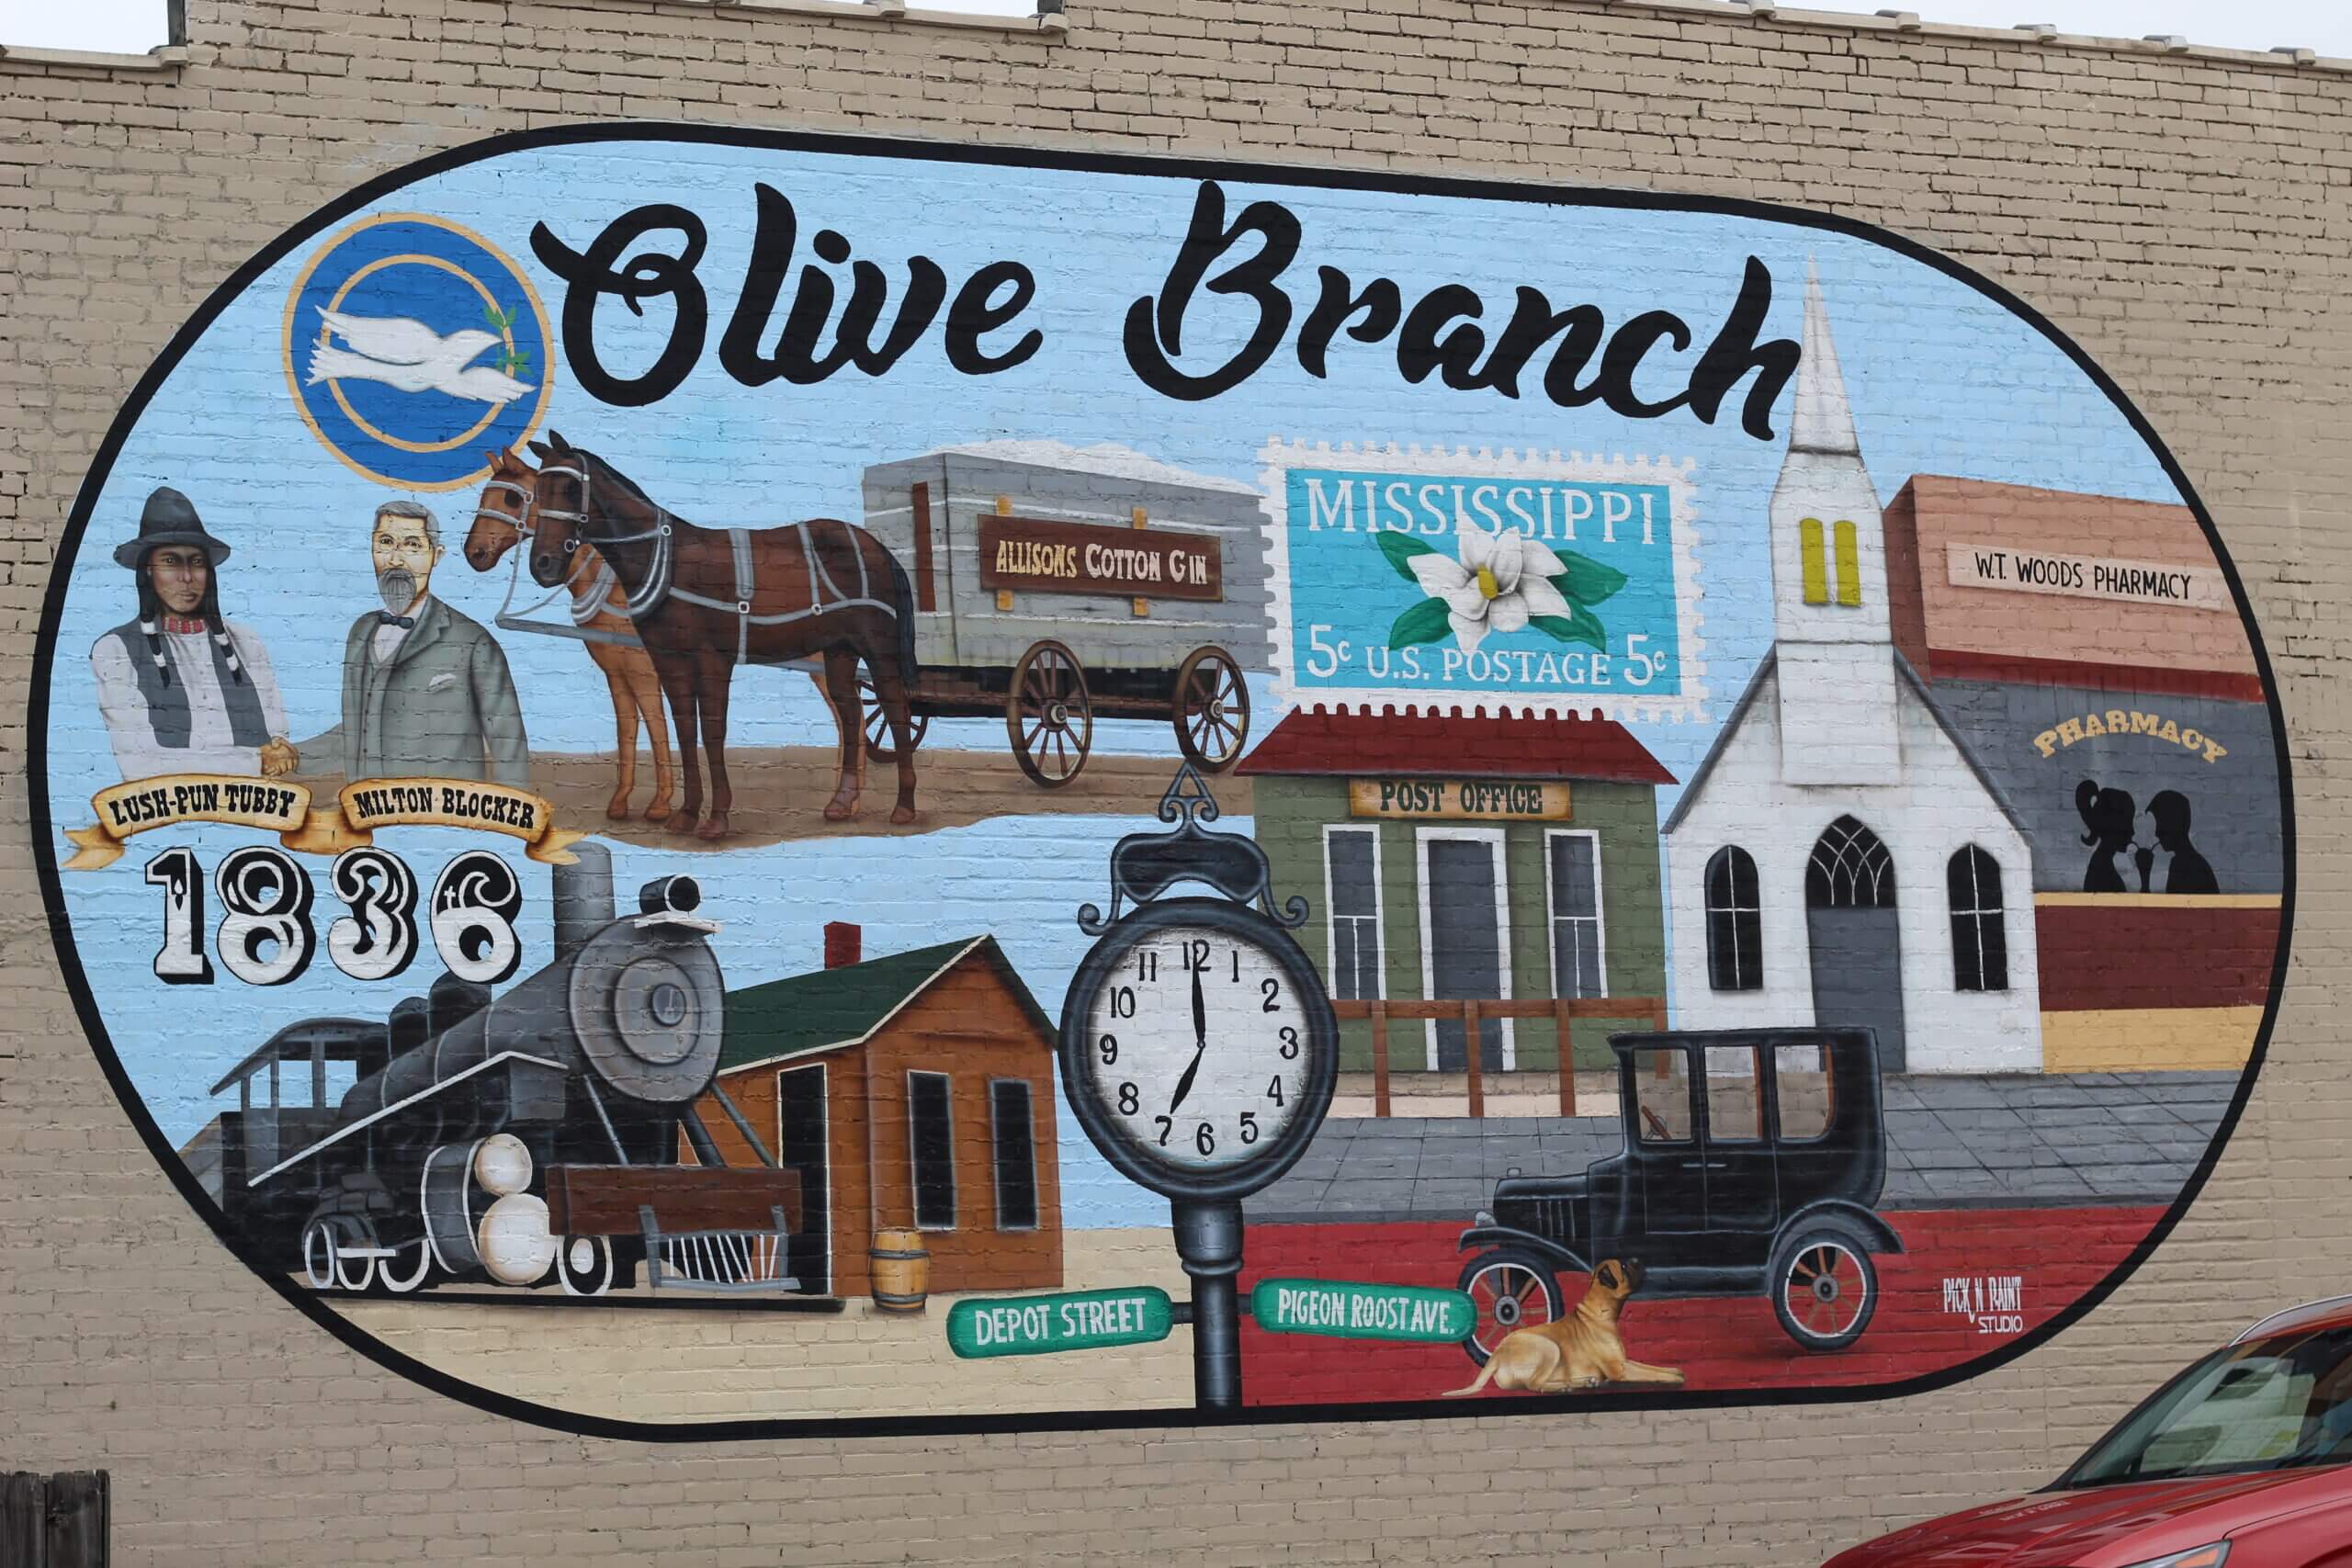 Olive Branch again rated high from Money Magazine